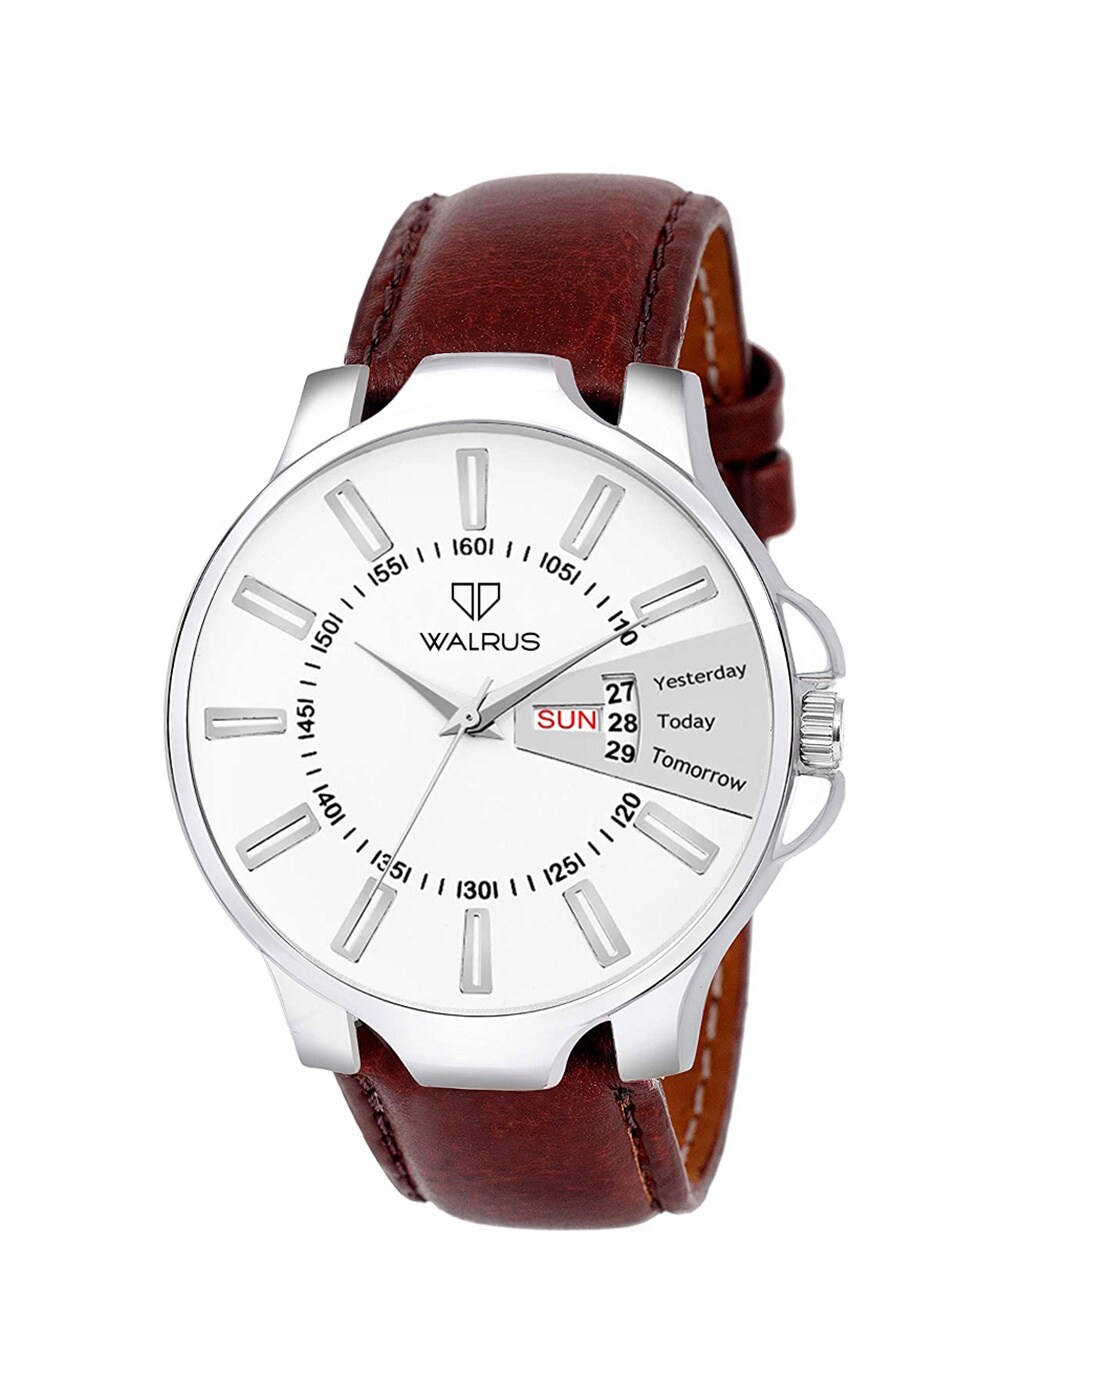 Buy Vintage Walrus Watch Leather Watch Ladies Watch Men's Watch Birthday  Gift Ideas Black and Red Fashion Accessory Mountain Watch Online in India -  Etsy